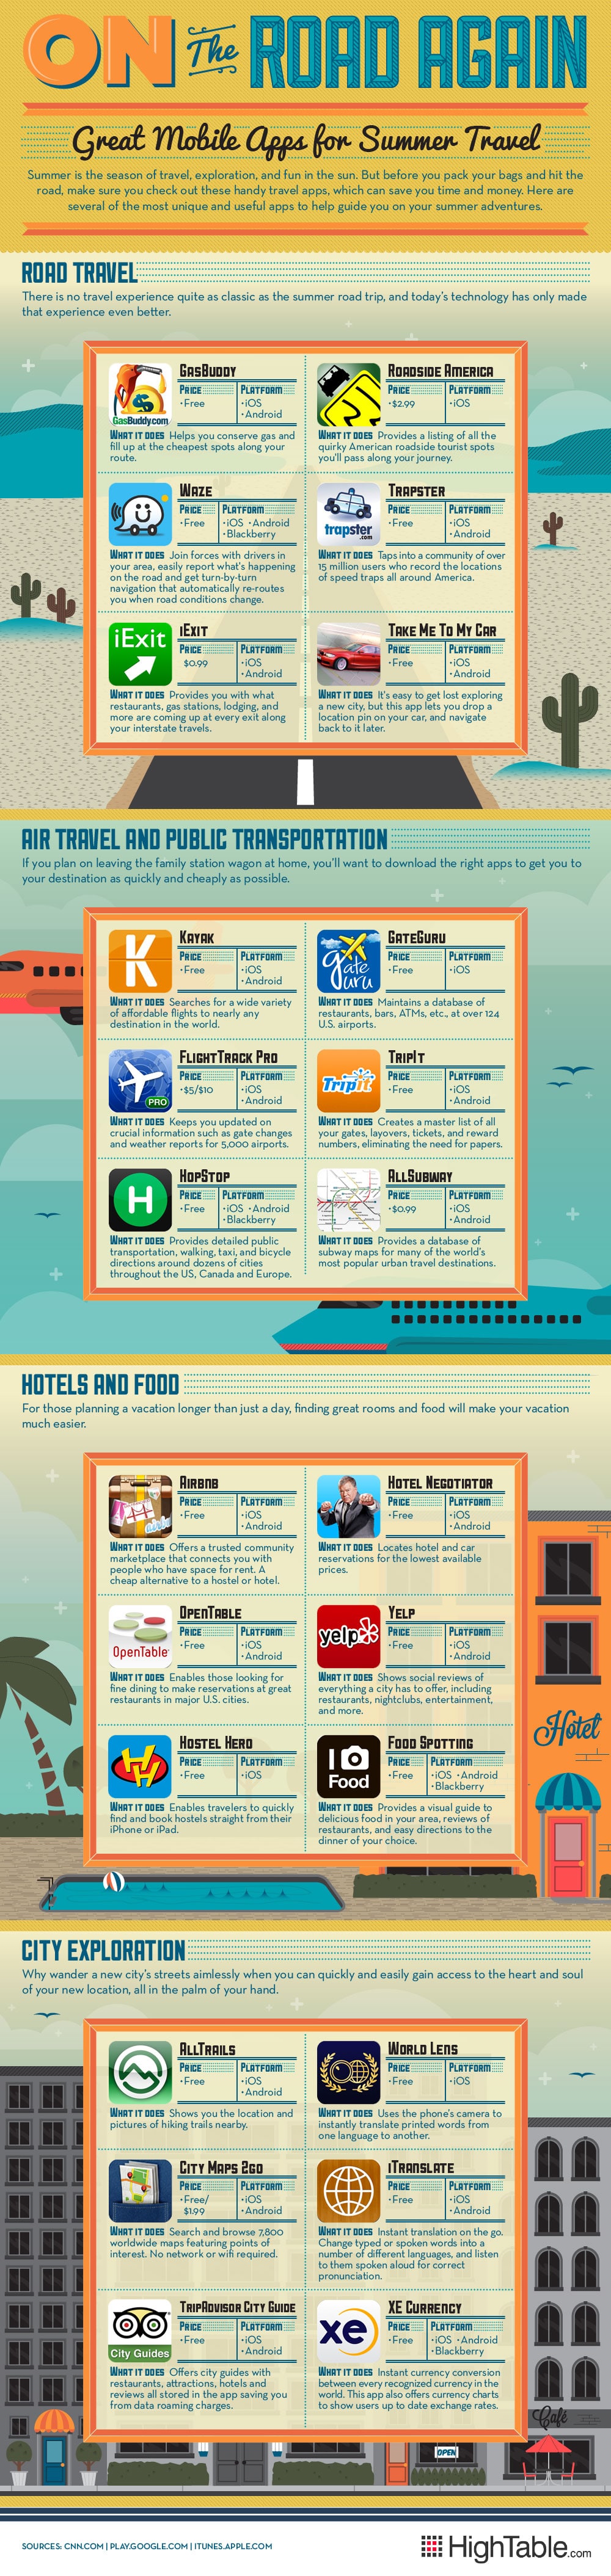 24 Mobile Apps To Make Your Summer Road Trip Better [Infographic]